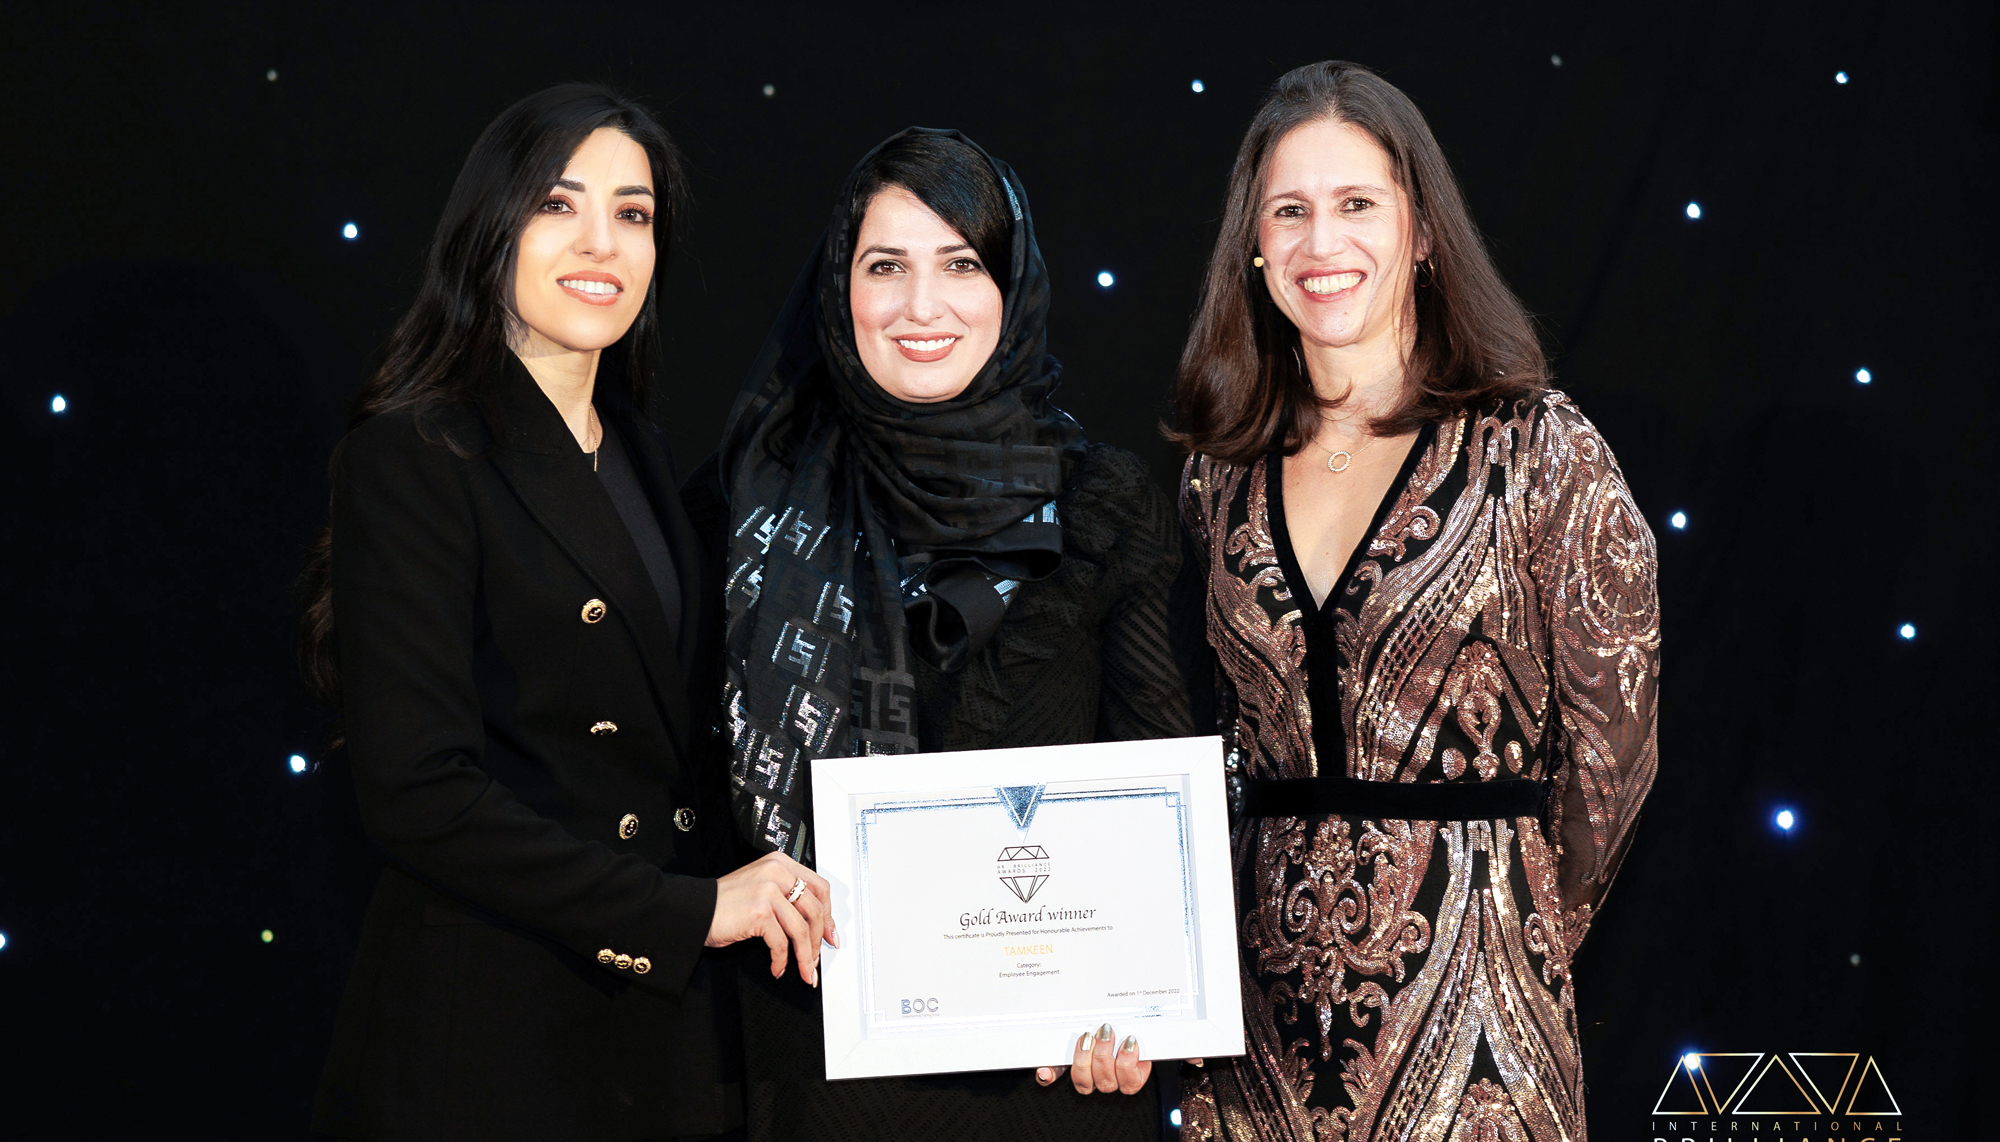 Tamkeen Receives Two Gold International Awards by HR Brilliance Awards for Excellence in HR